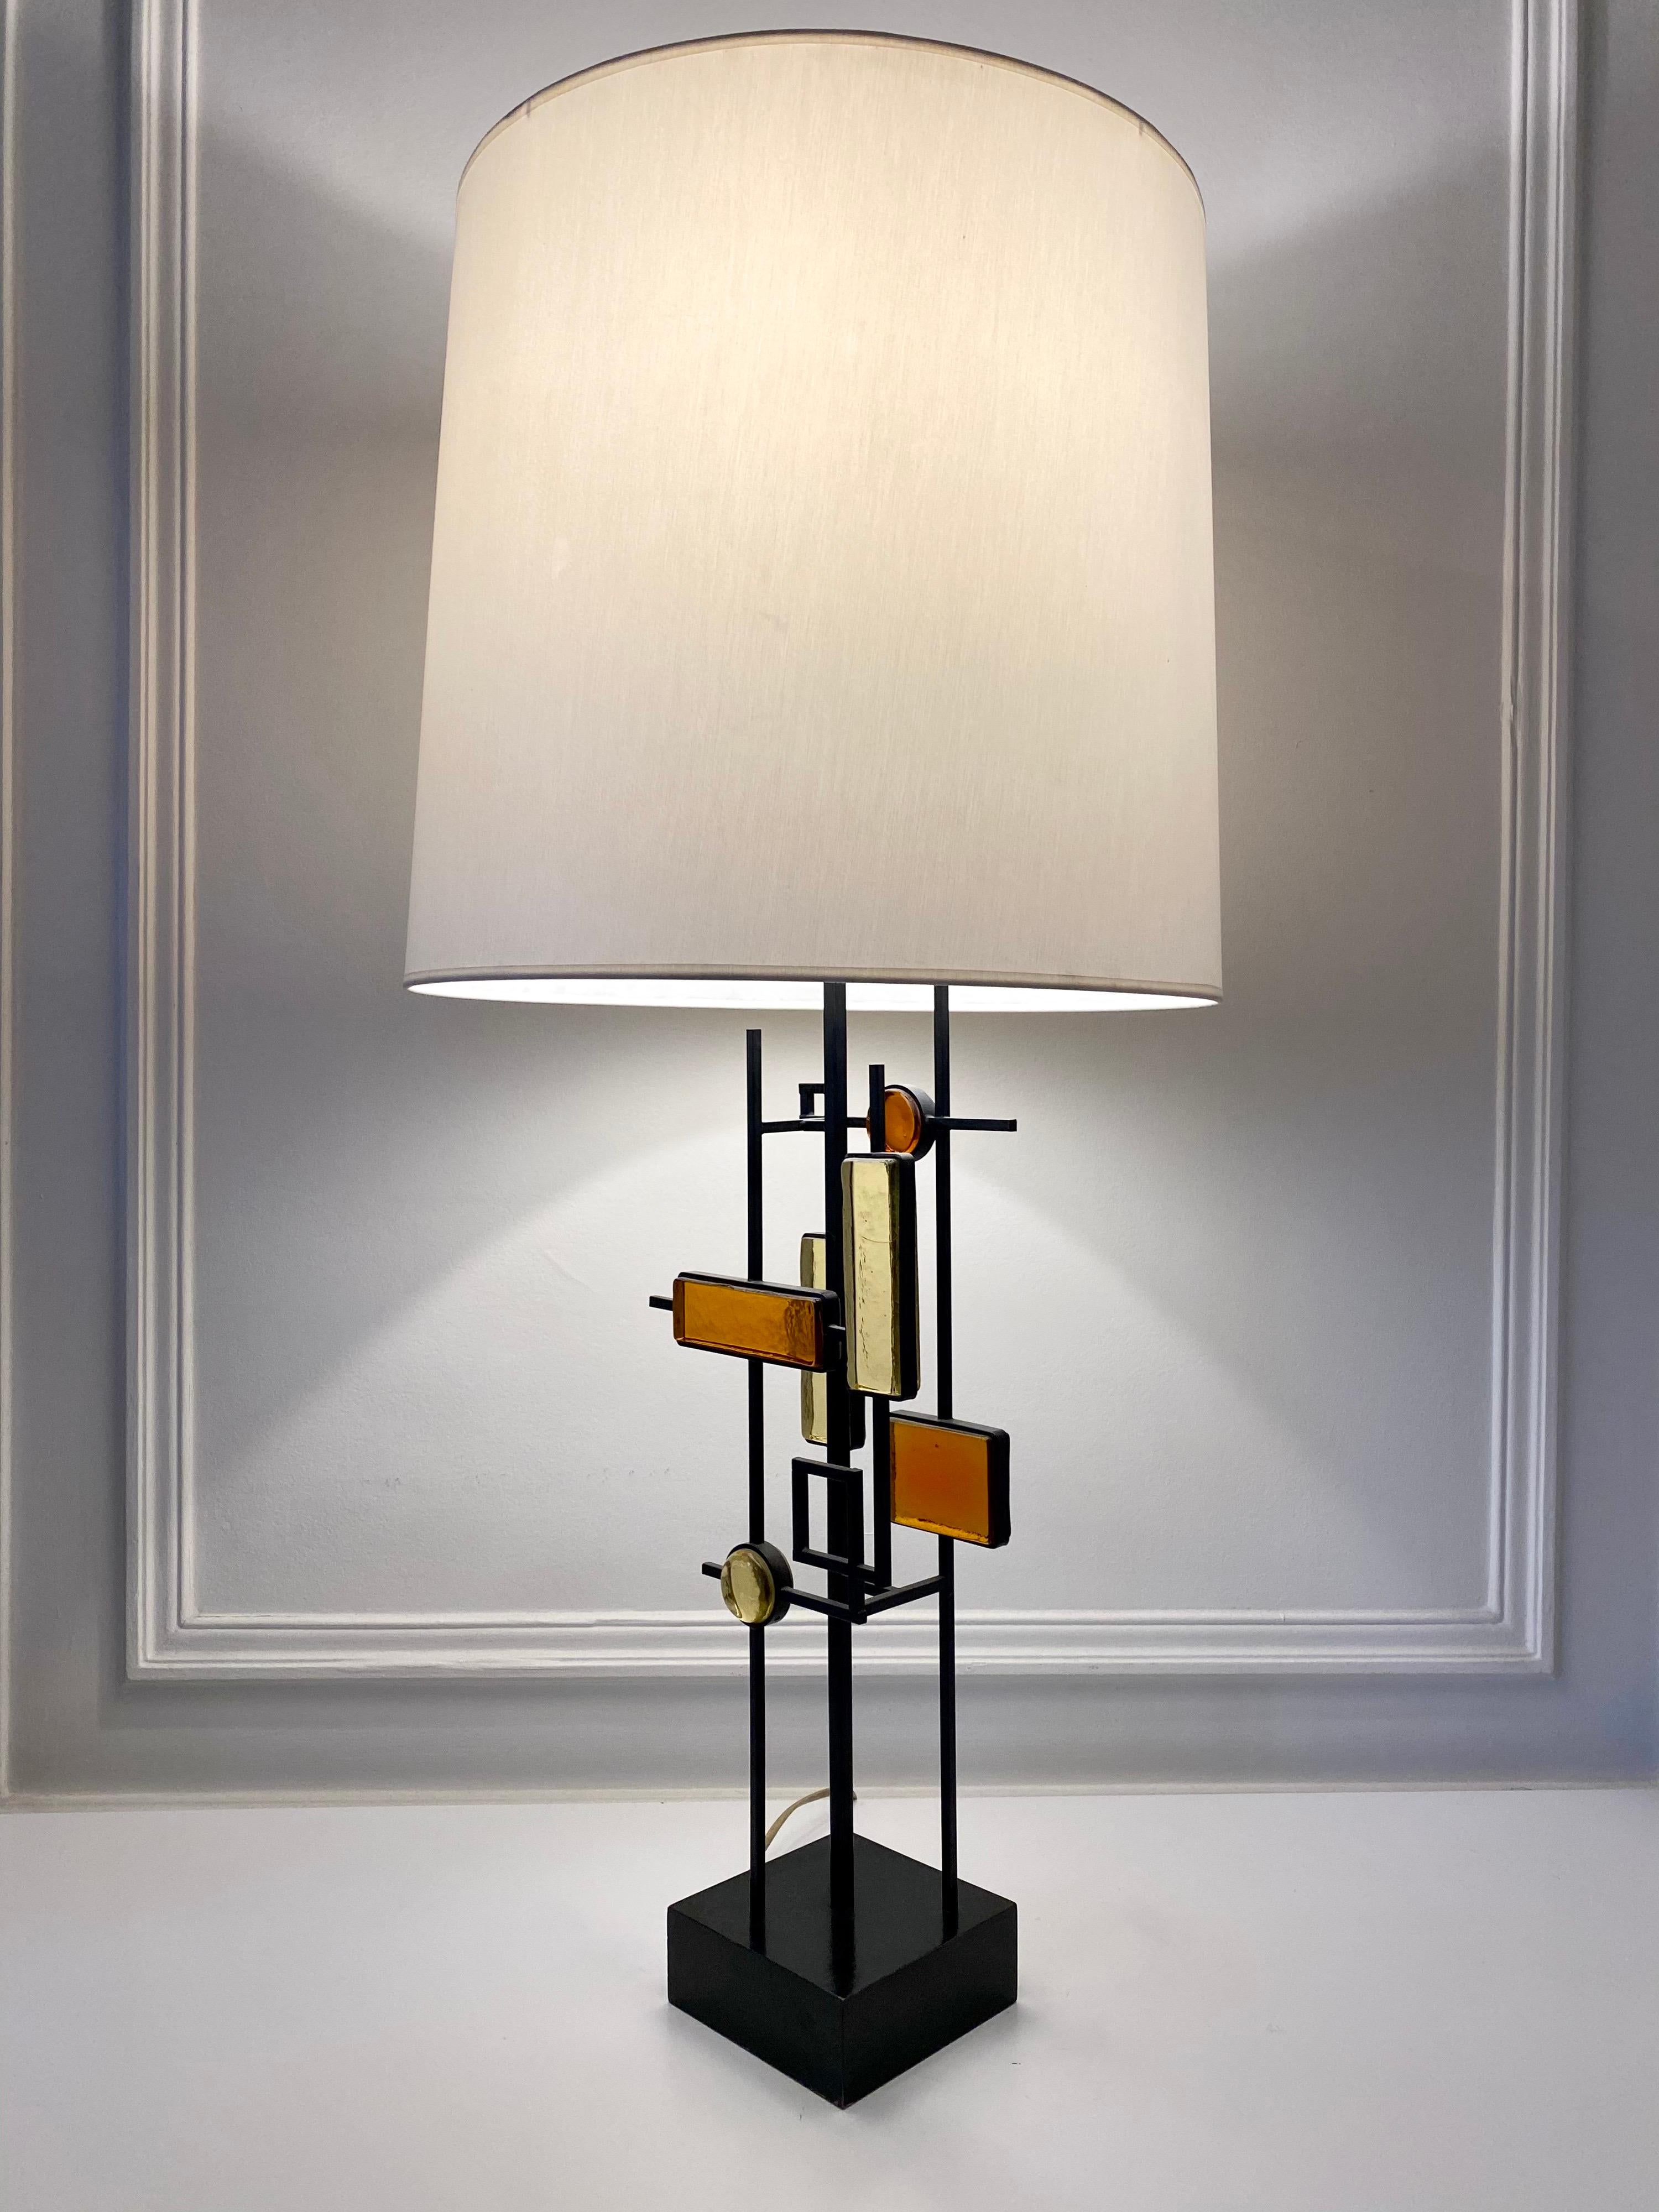 Table lamp designed by Svend Aage Holm Sørensen. Black lacquered iron stem with geometric colored glass pieces and black lacquered wood base.
Svend Aage Holm Sorensen (1913-2004) was a Danish designer who is best known for his wide collection of